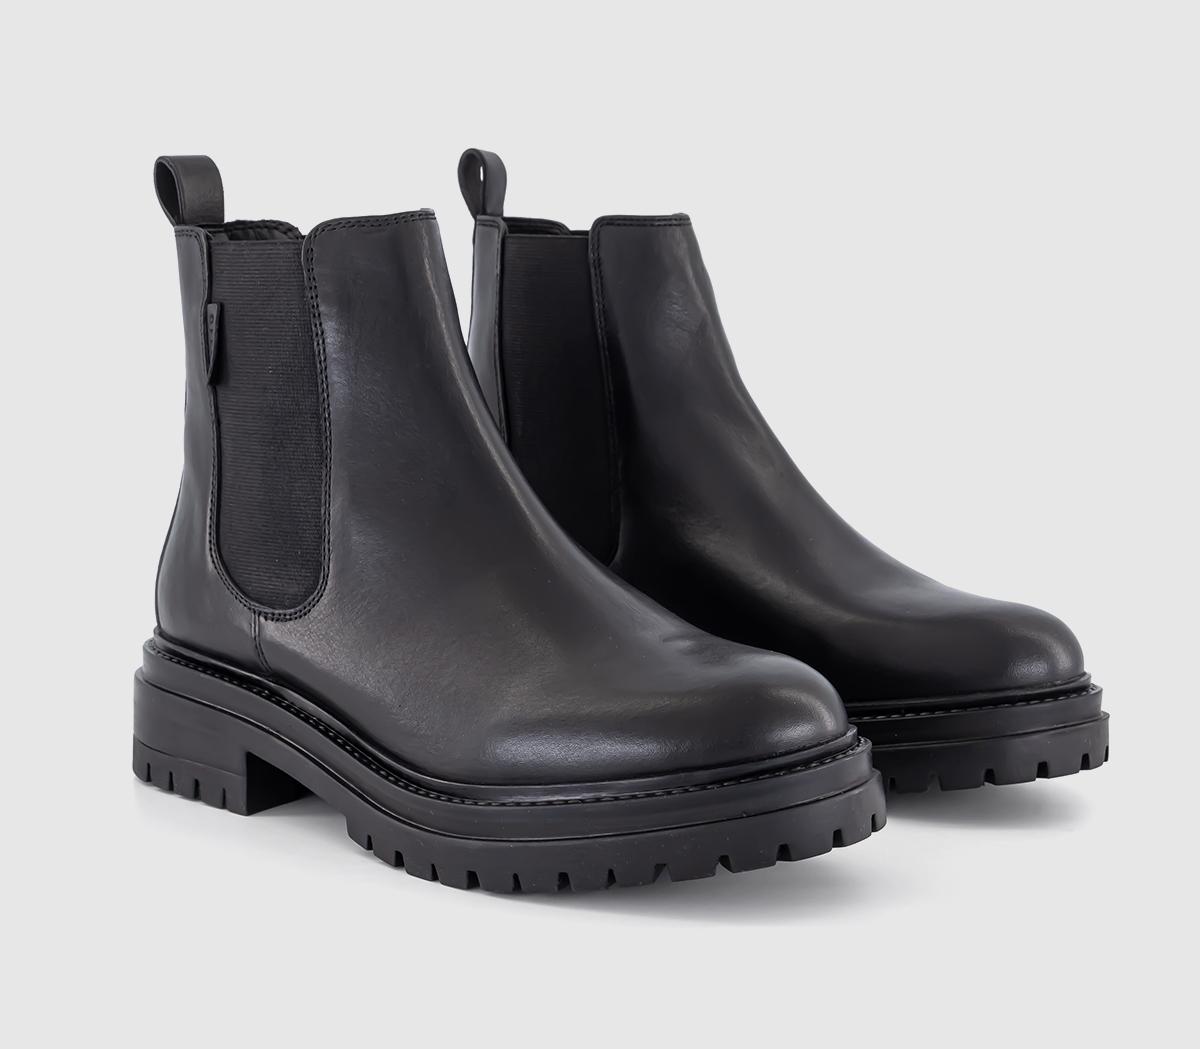 OFFICE Angelica Cleated Chelsea Boots Black Leather - Women's Ankle Boots